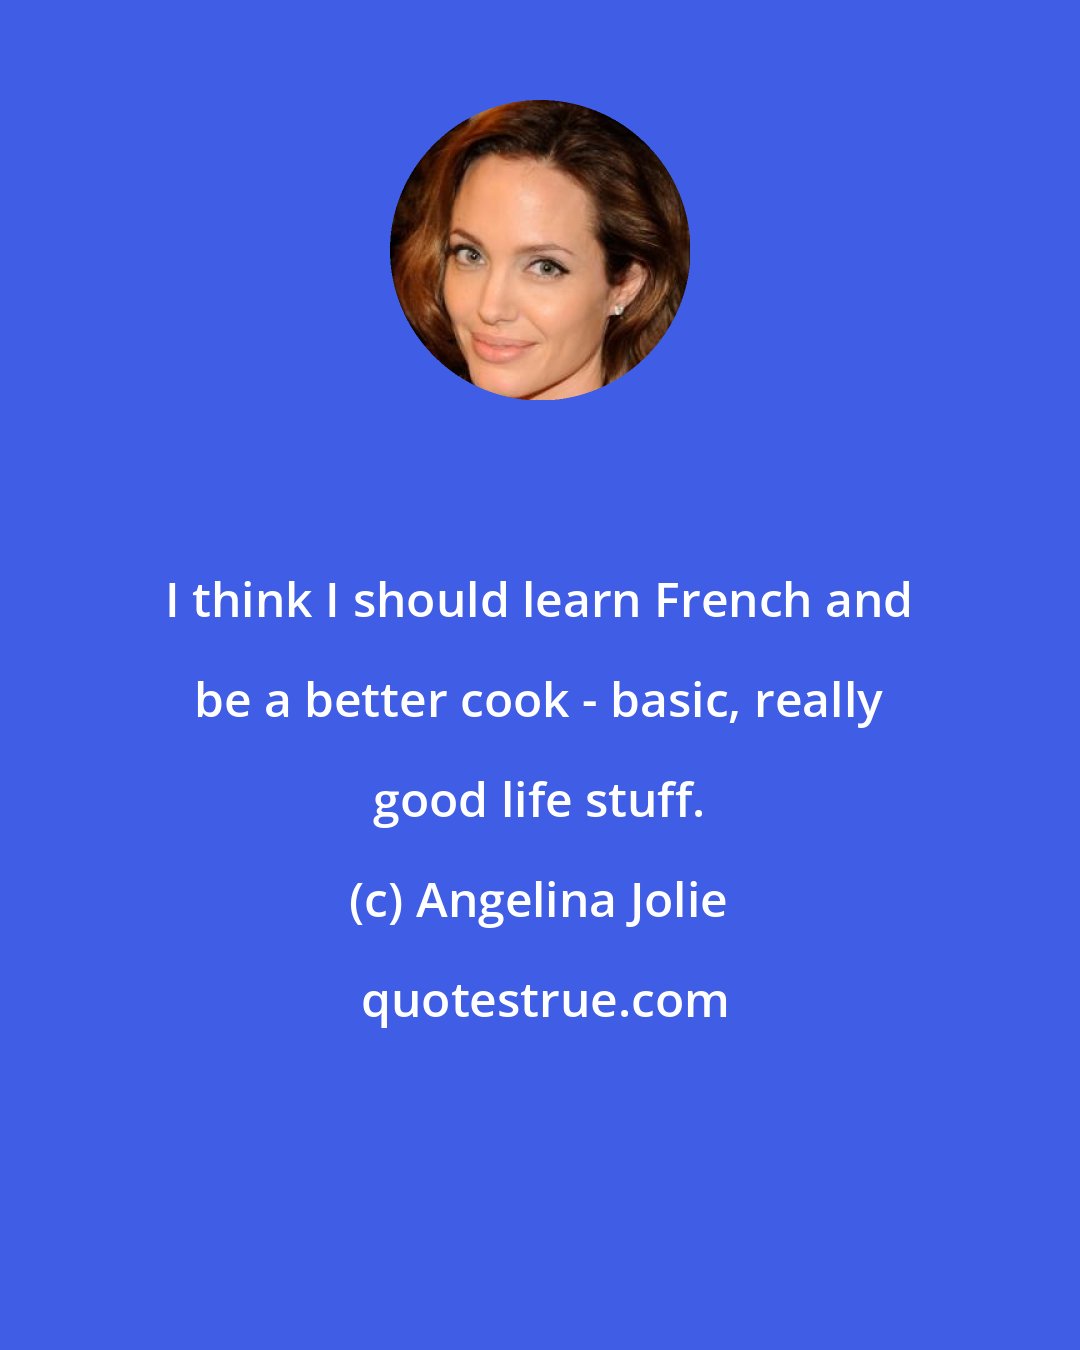 Angelina Jolie: I think I should learn French and be a better cook - basic, really good life stuff.